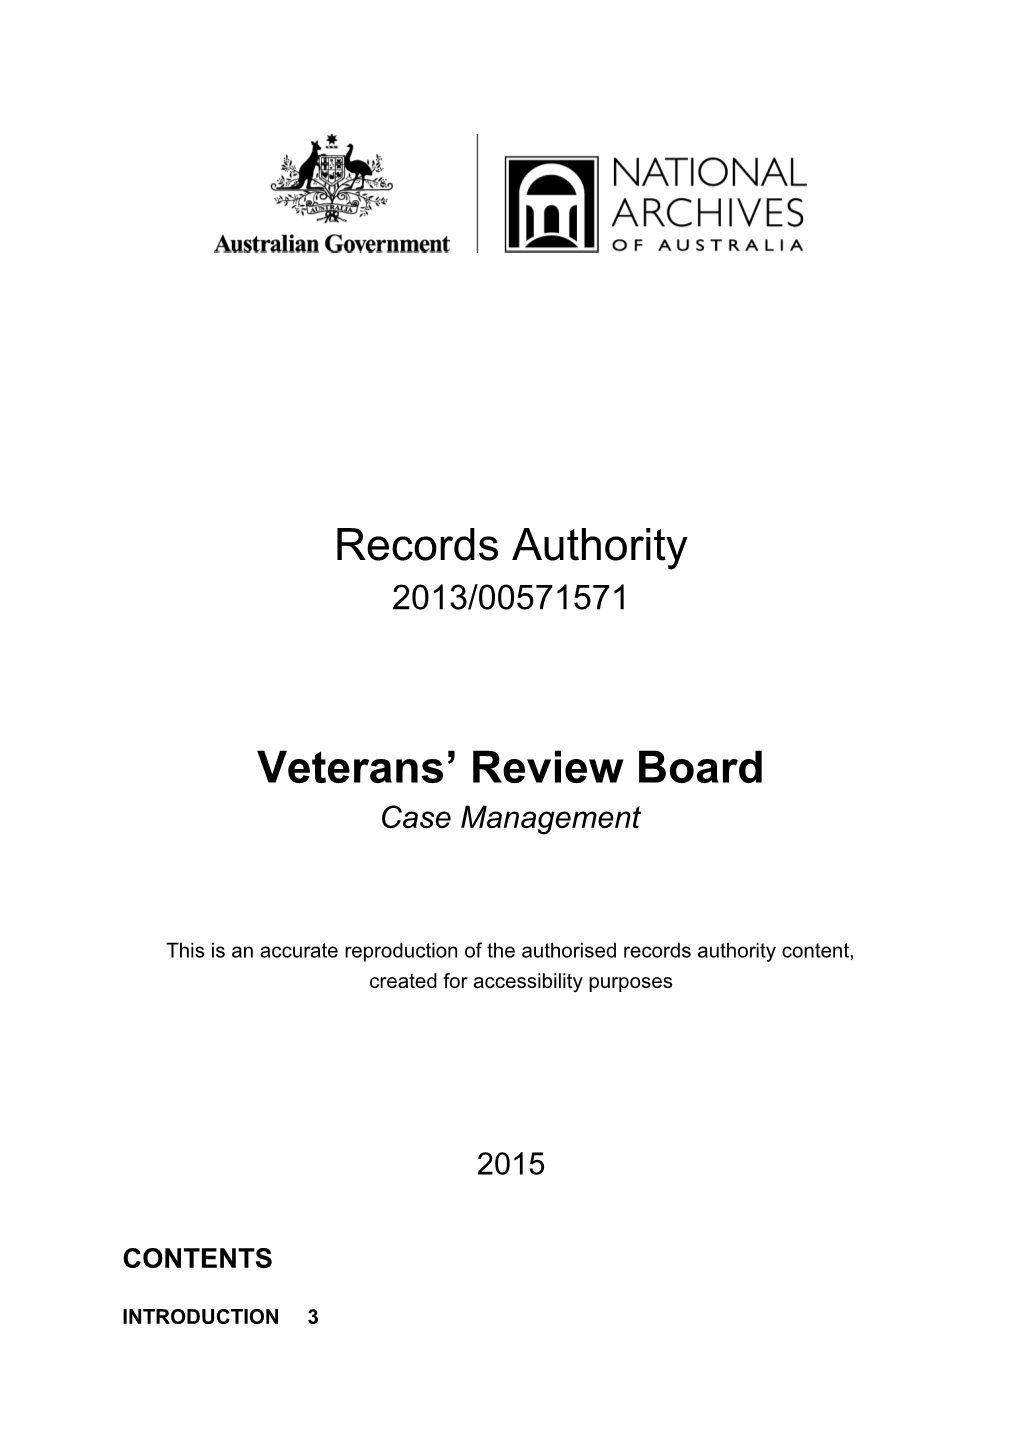 Veterans Review Board - Record Authority - 2013/00571571